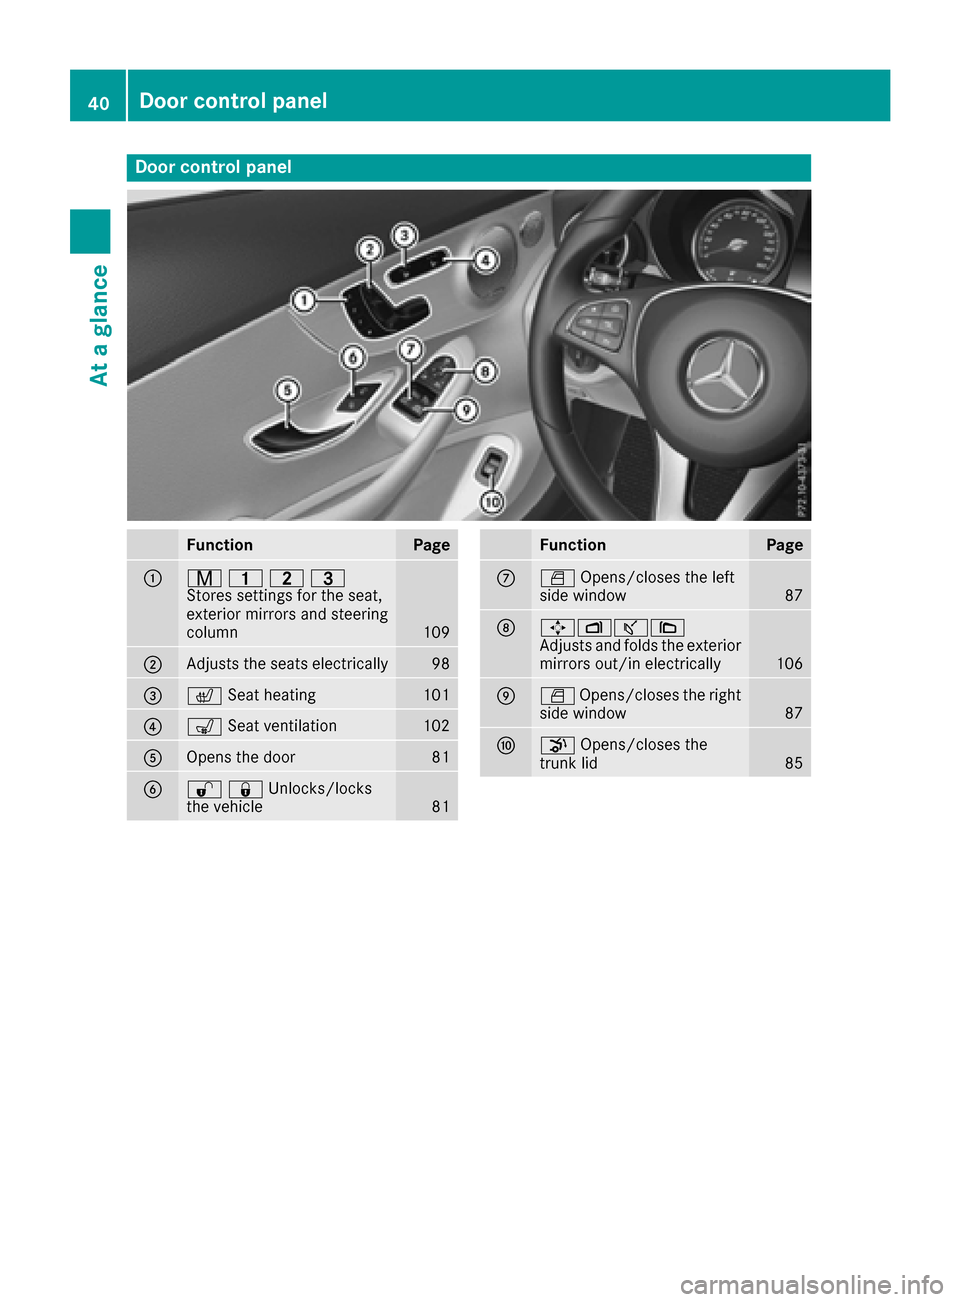 MERCEDES-BENZ C-Class COUPE 2017 CL205 Service Manual Door controlpanel
FunctionPage
:r 45=
Stores settings for the seat,
exterior mirrors and steering
column
109
;Adjusts the seats electrically98
=c Seath eating101
?sSeatv entilation102
AOpens the door8